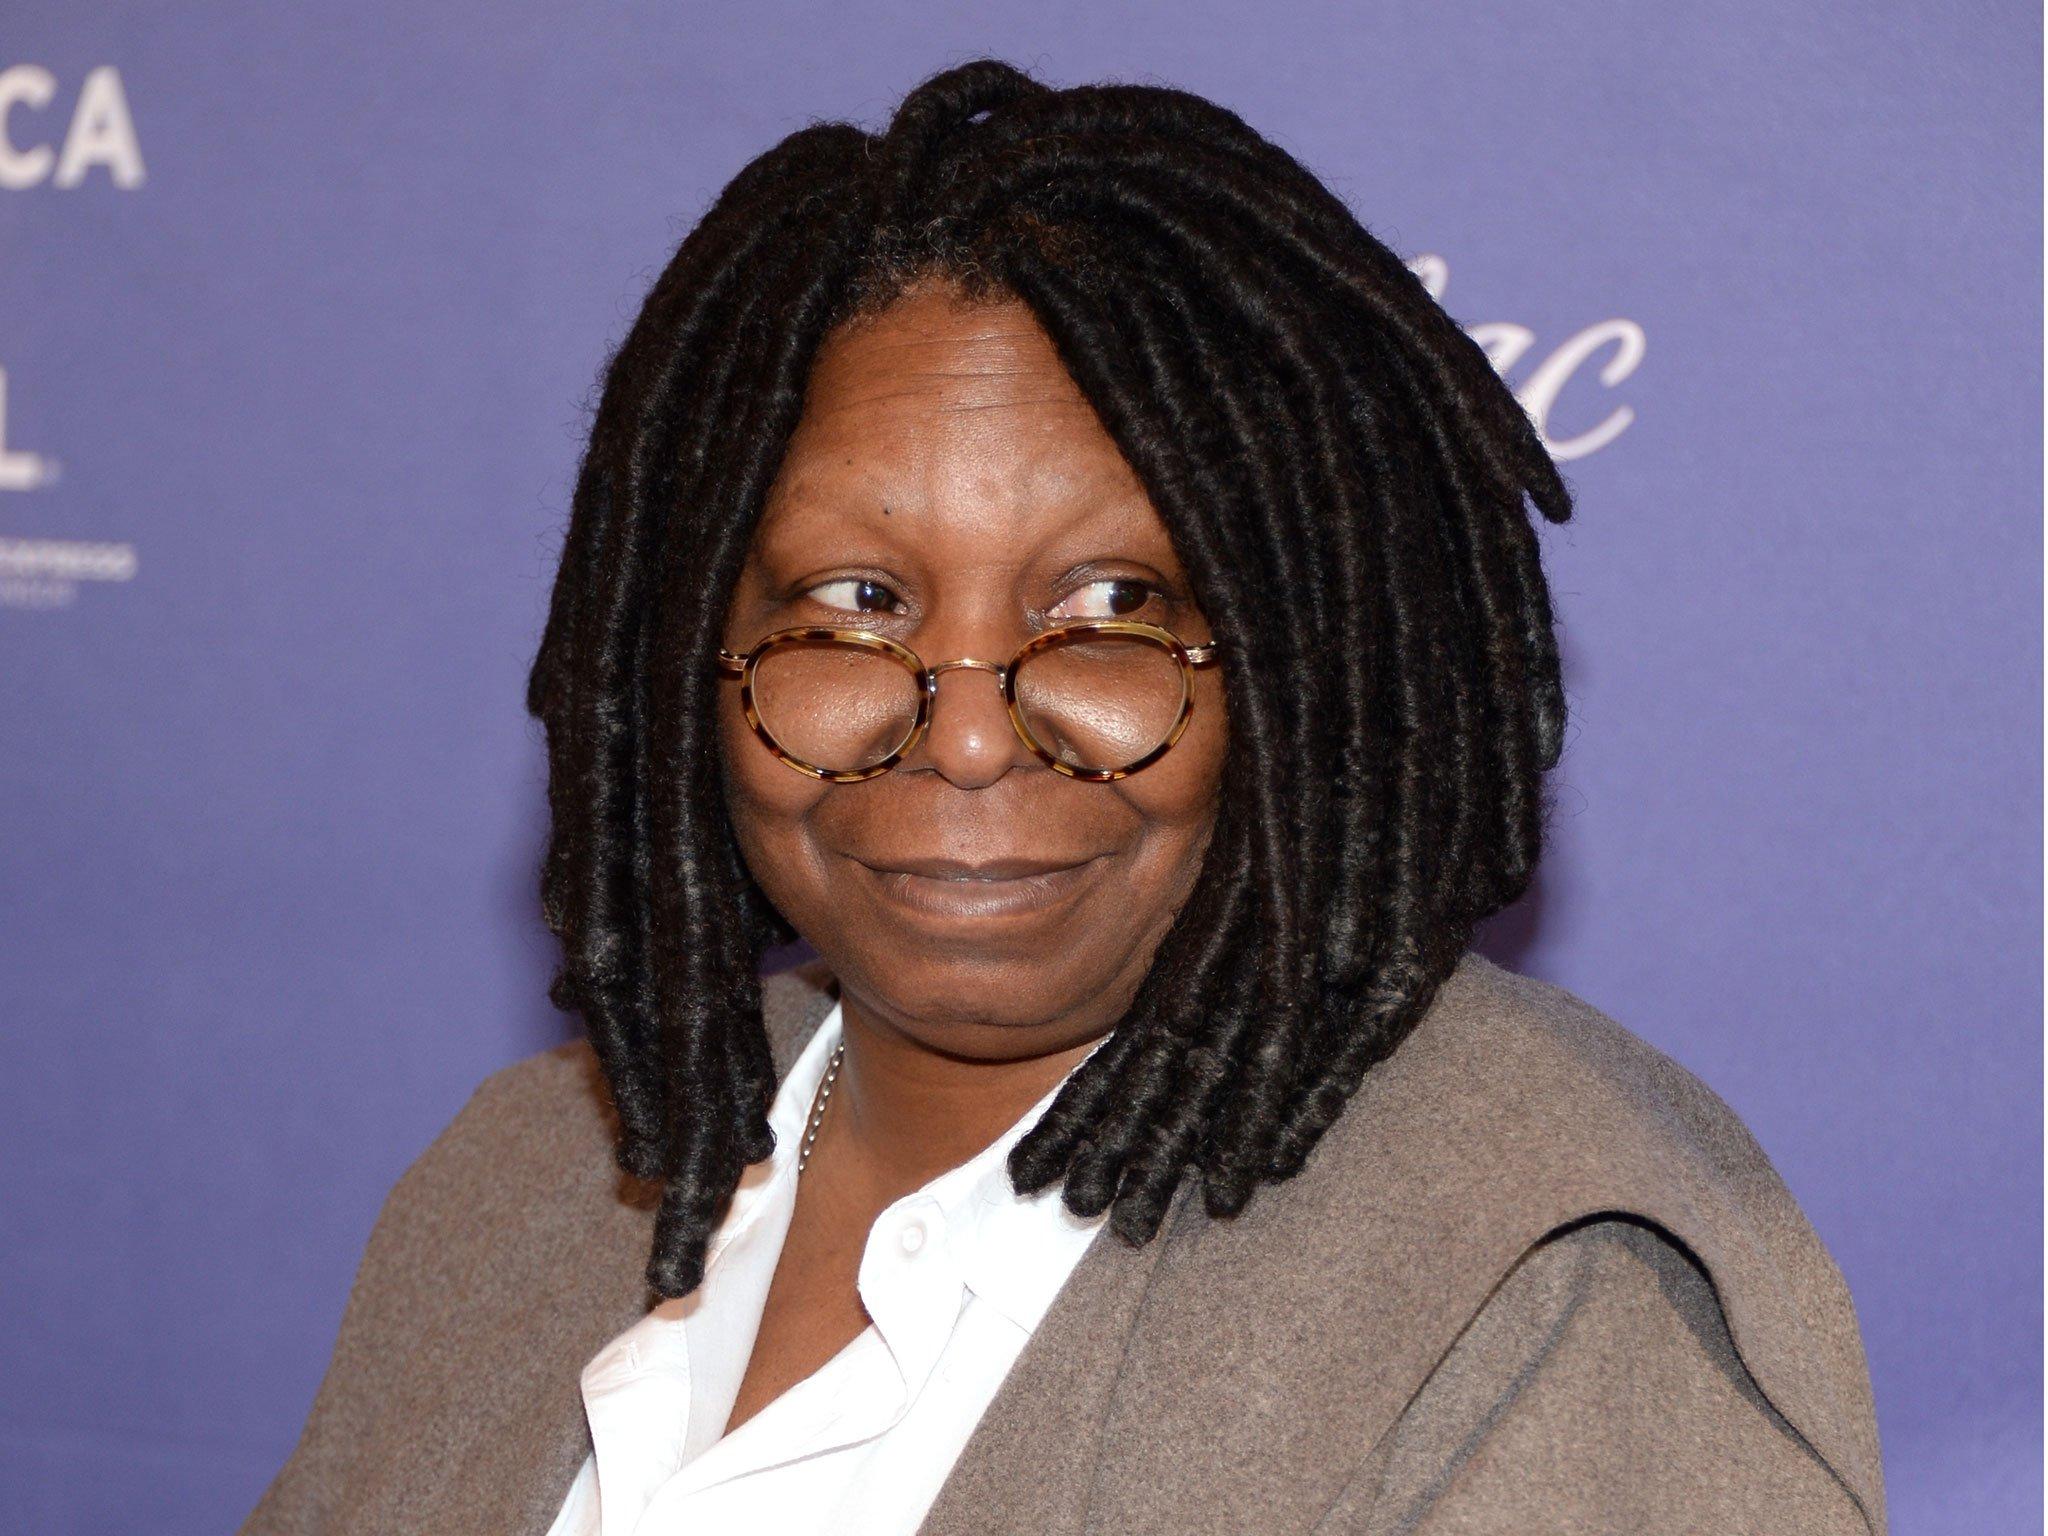 Whoopi Goldberg defends Bill Cosby over rape allegations: 'I have a